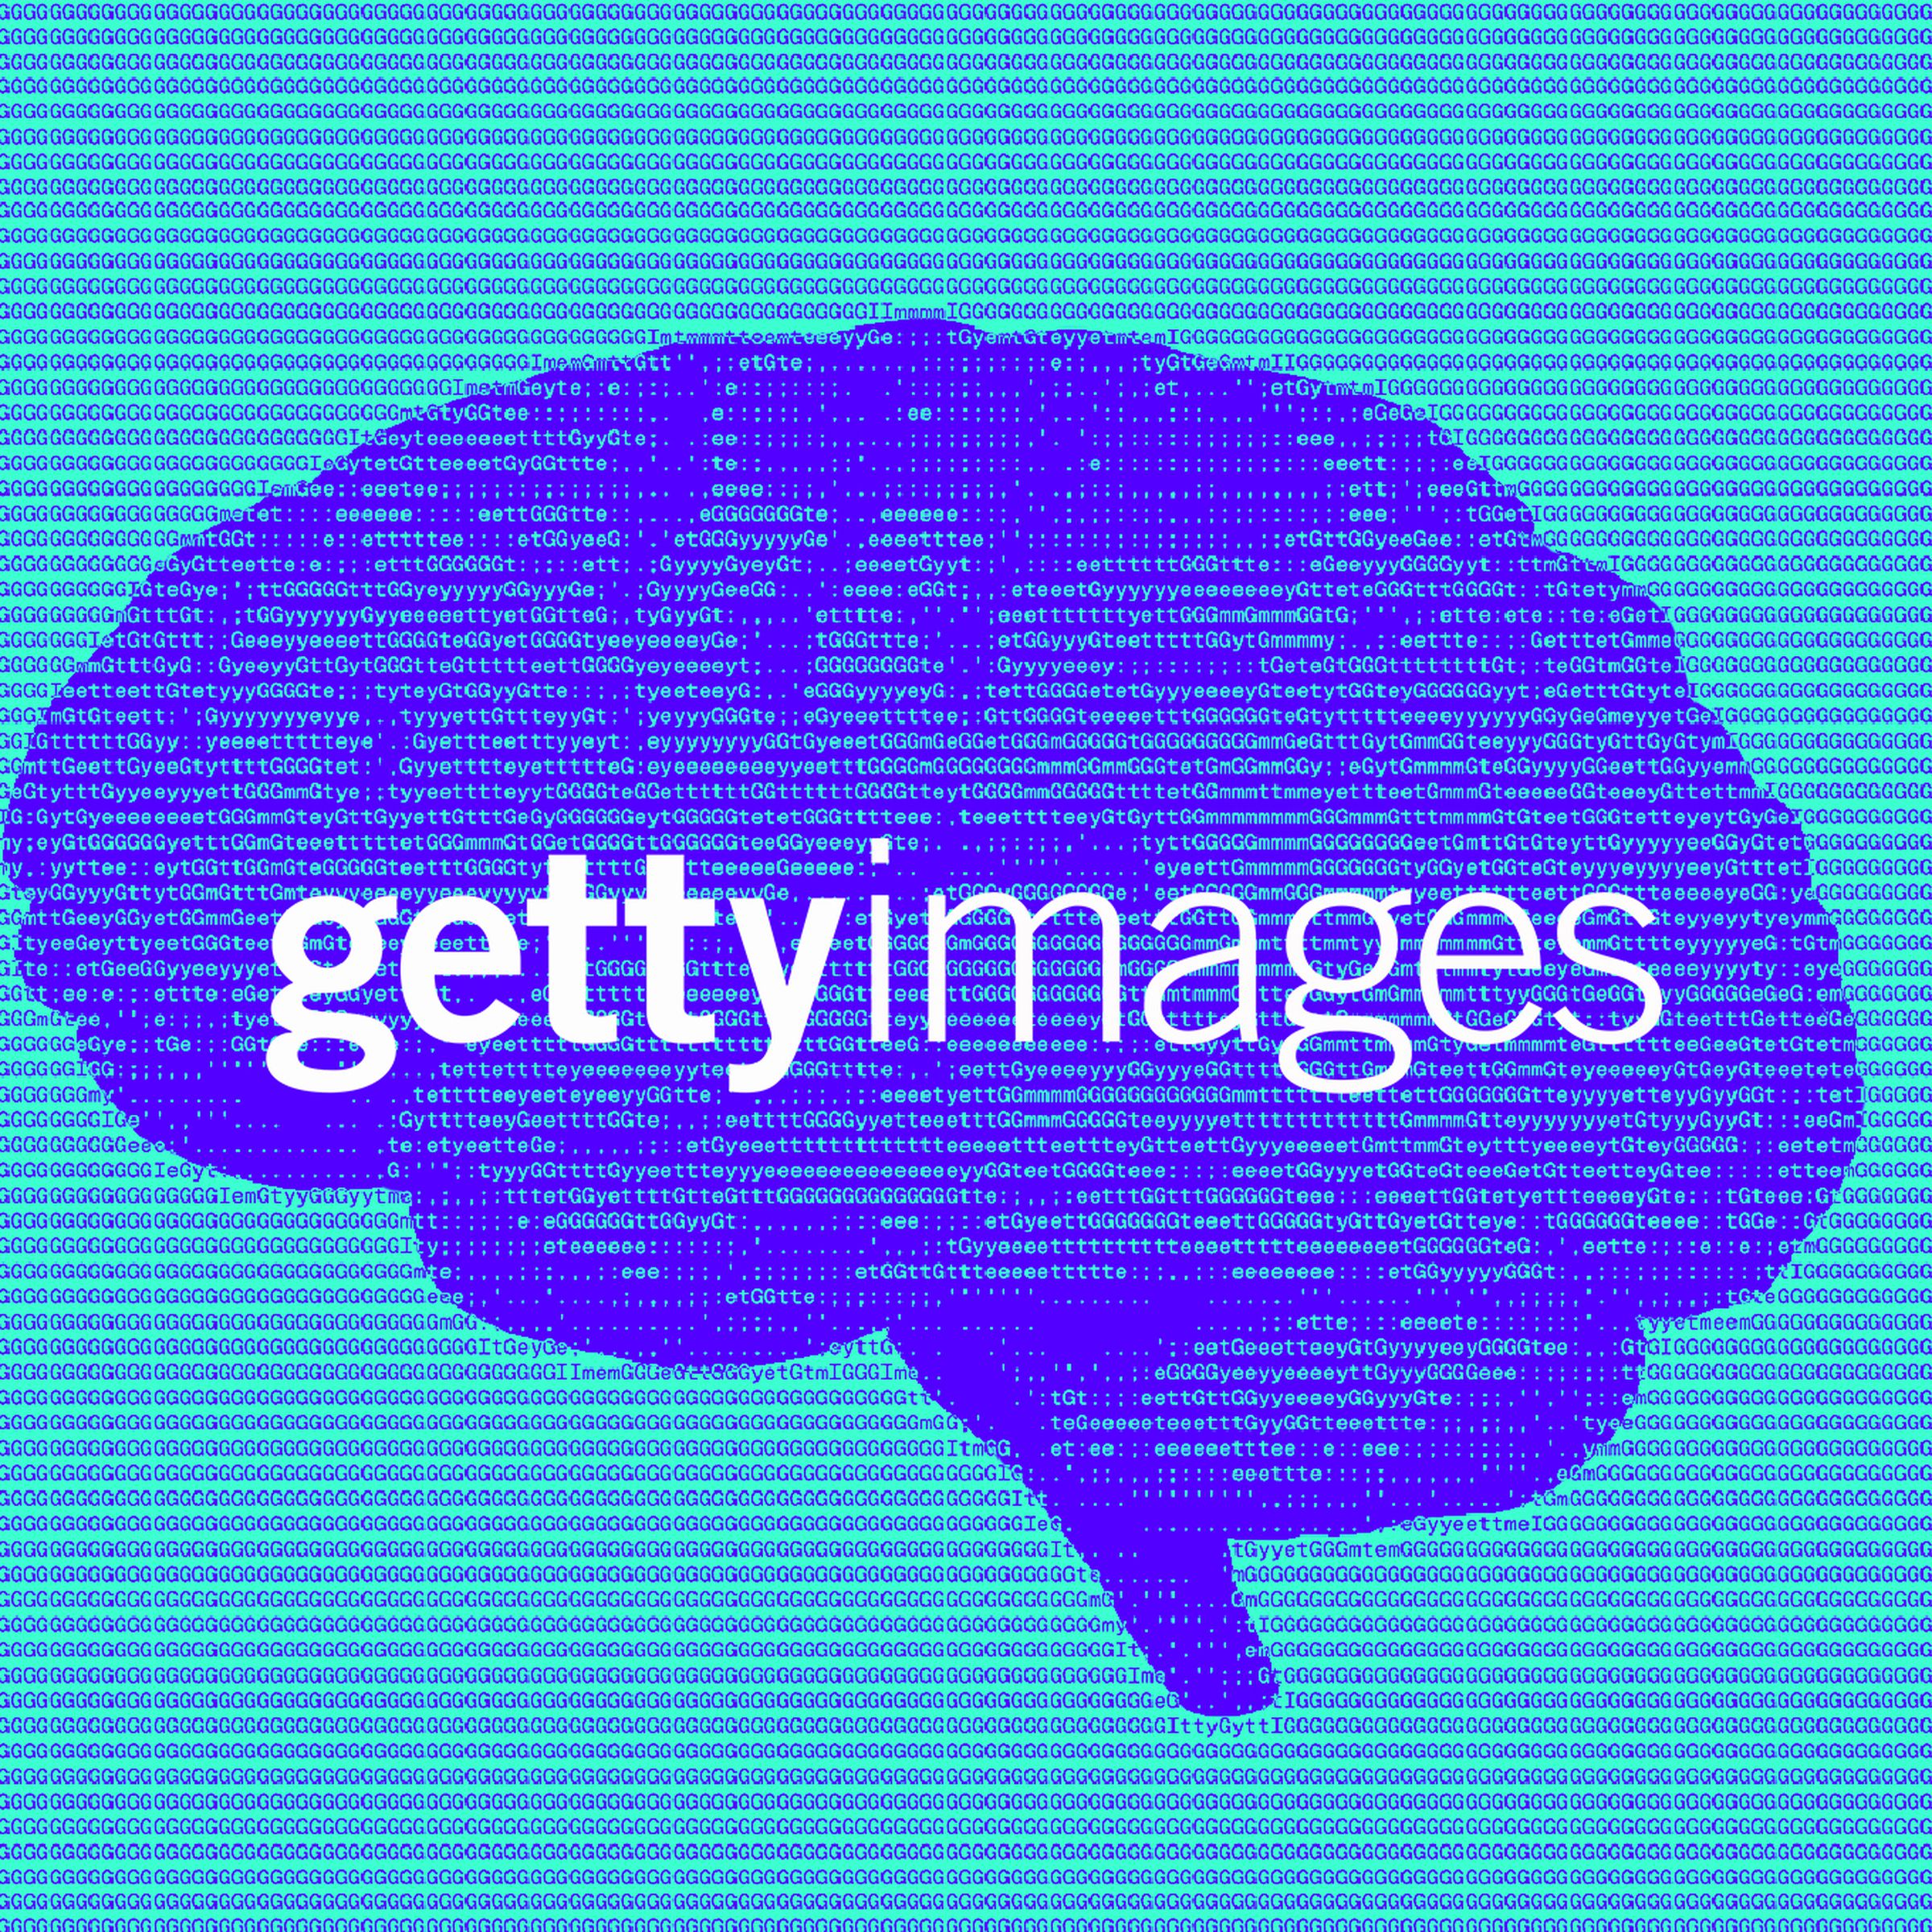 The Getty Images logo overlayed on a ASCII brain.